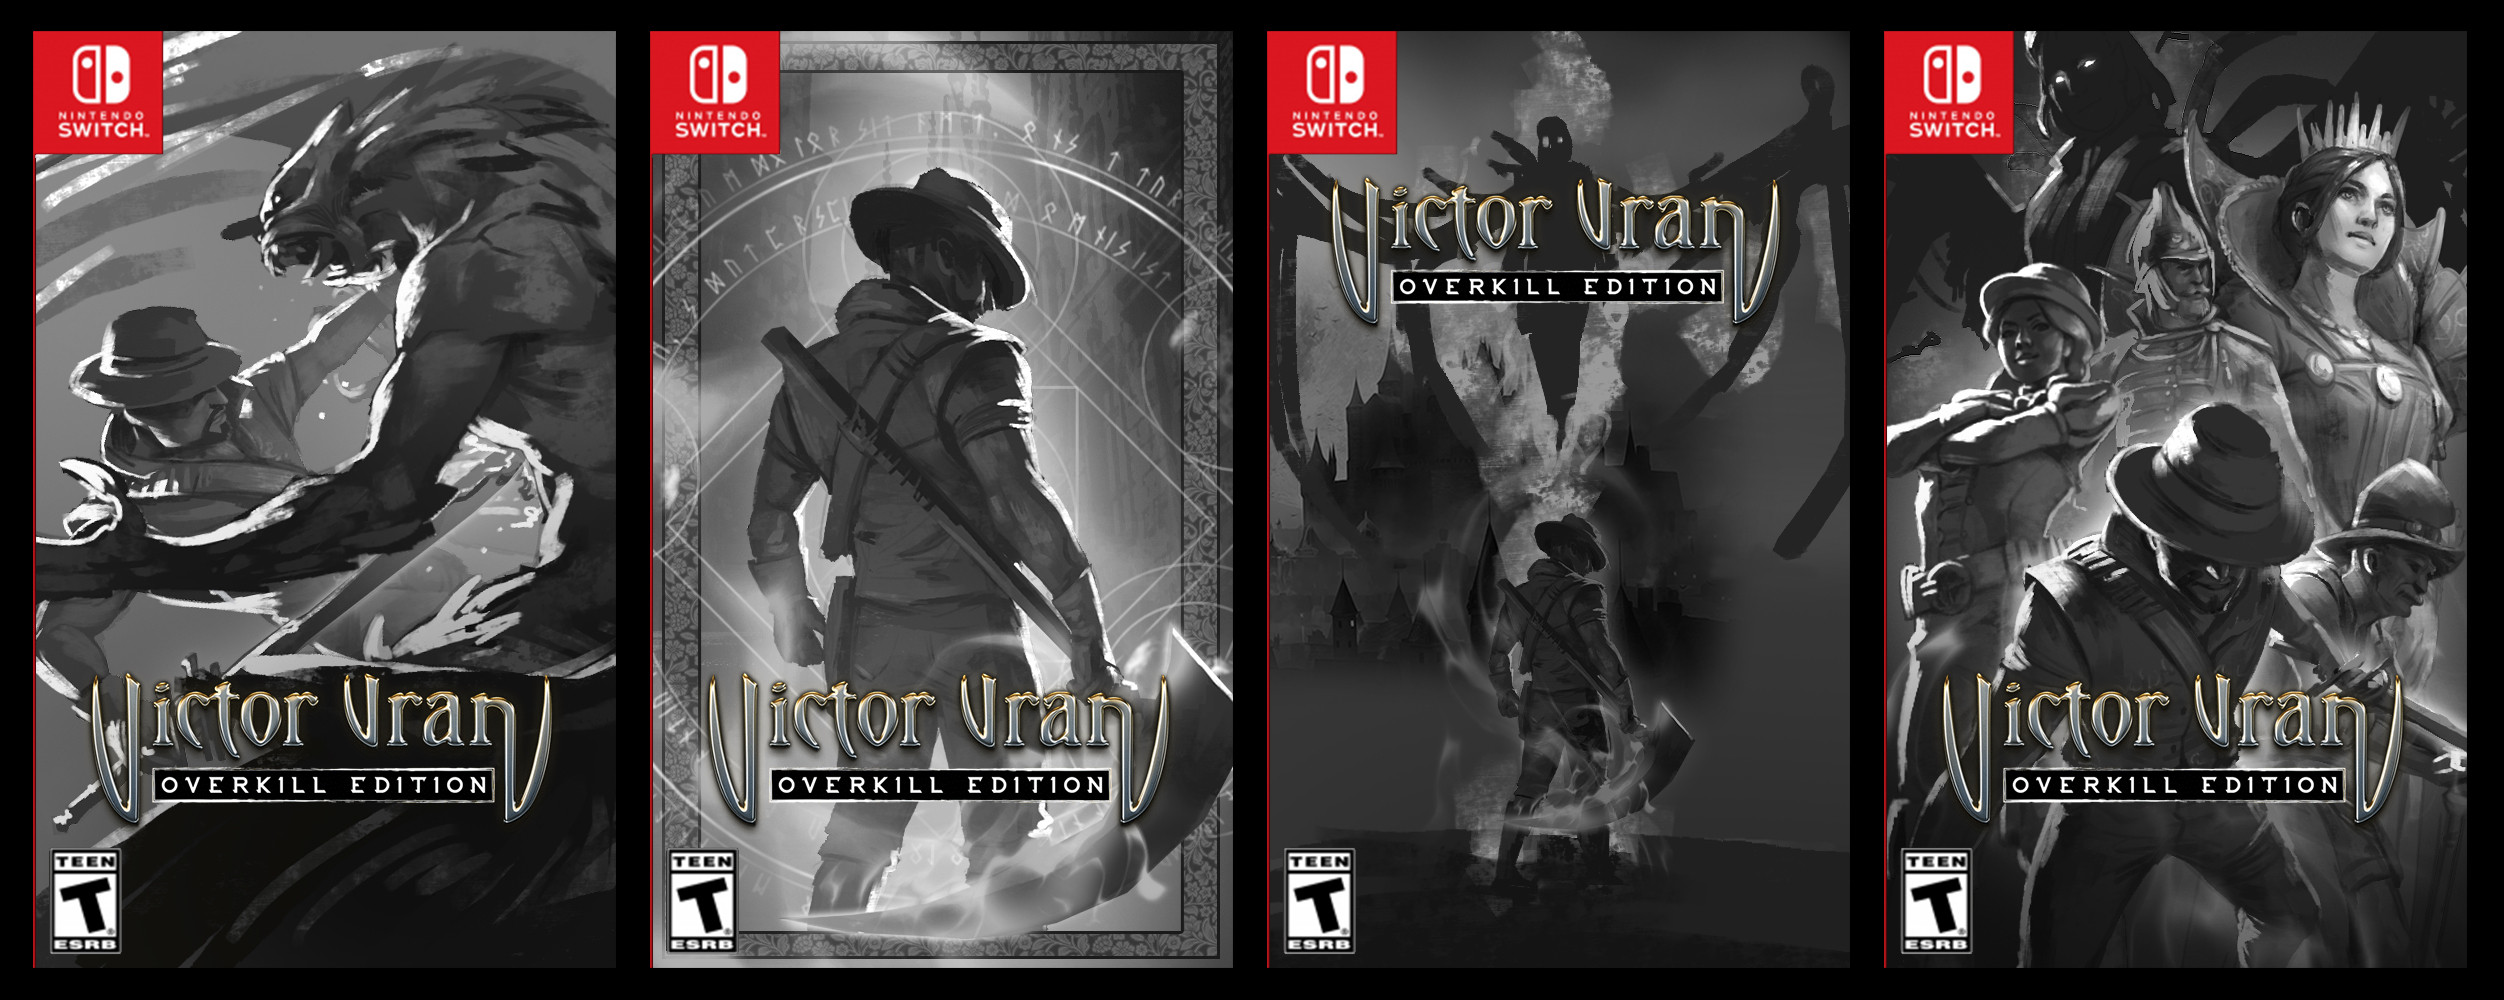 thumbnails with different cover ideas. I took the switch cover layout as an example because it is the most challenging one.